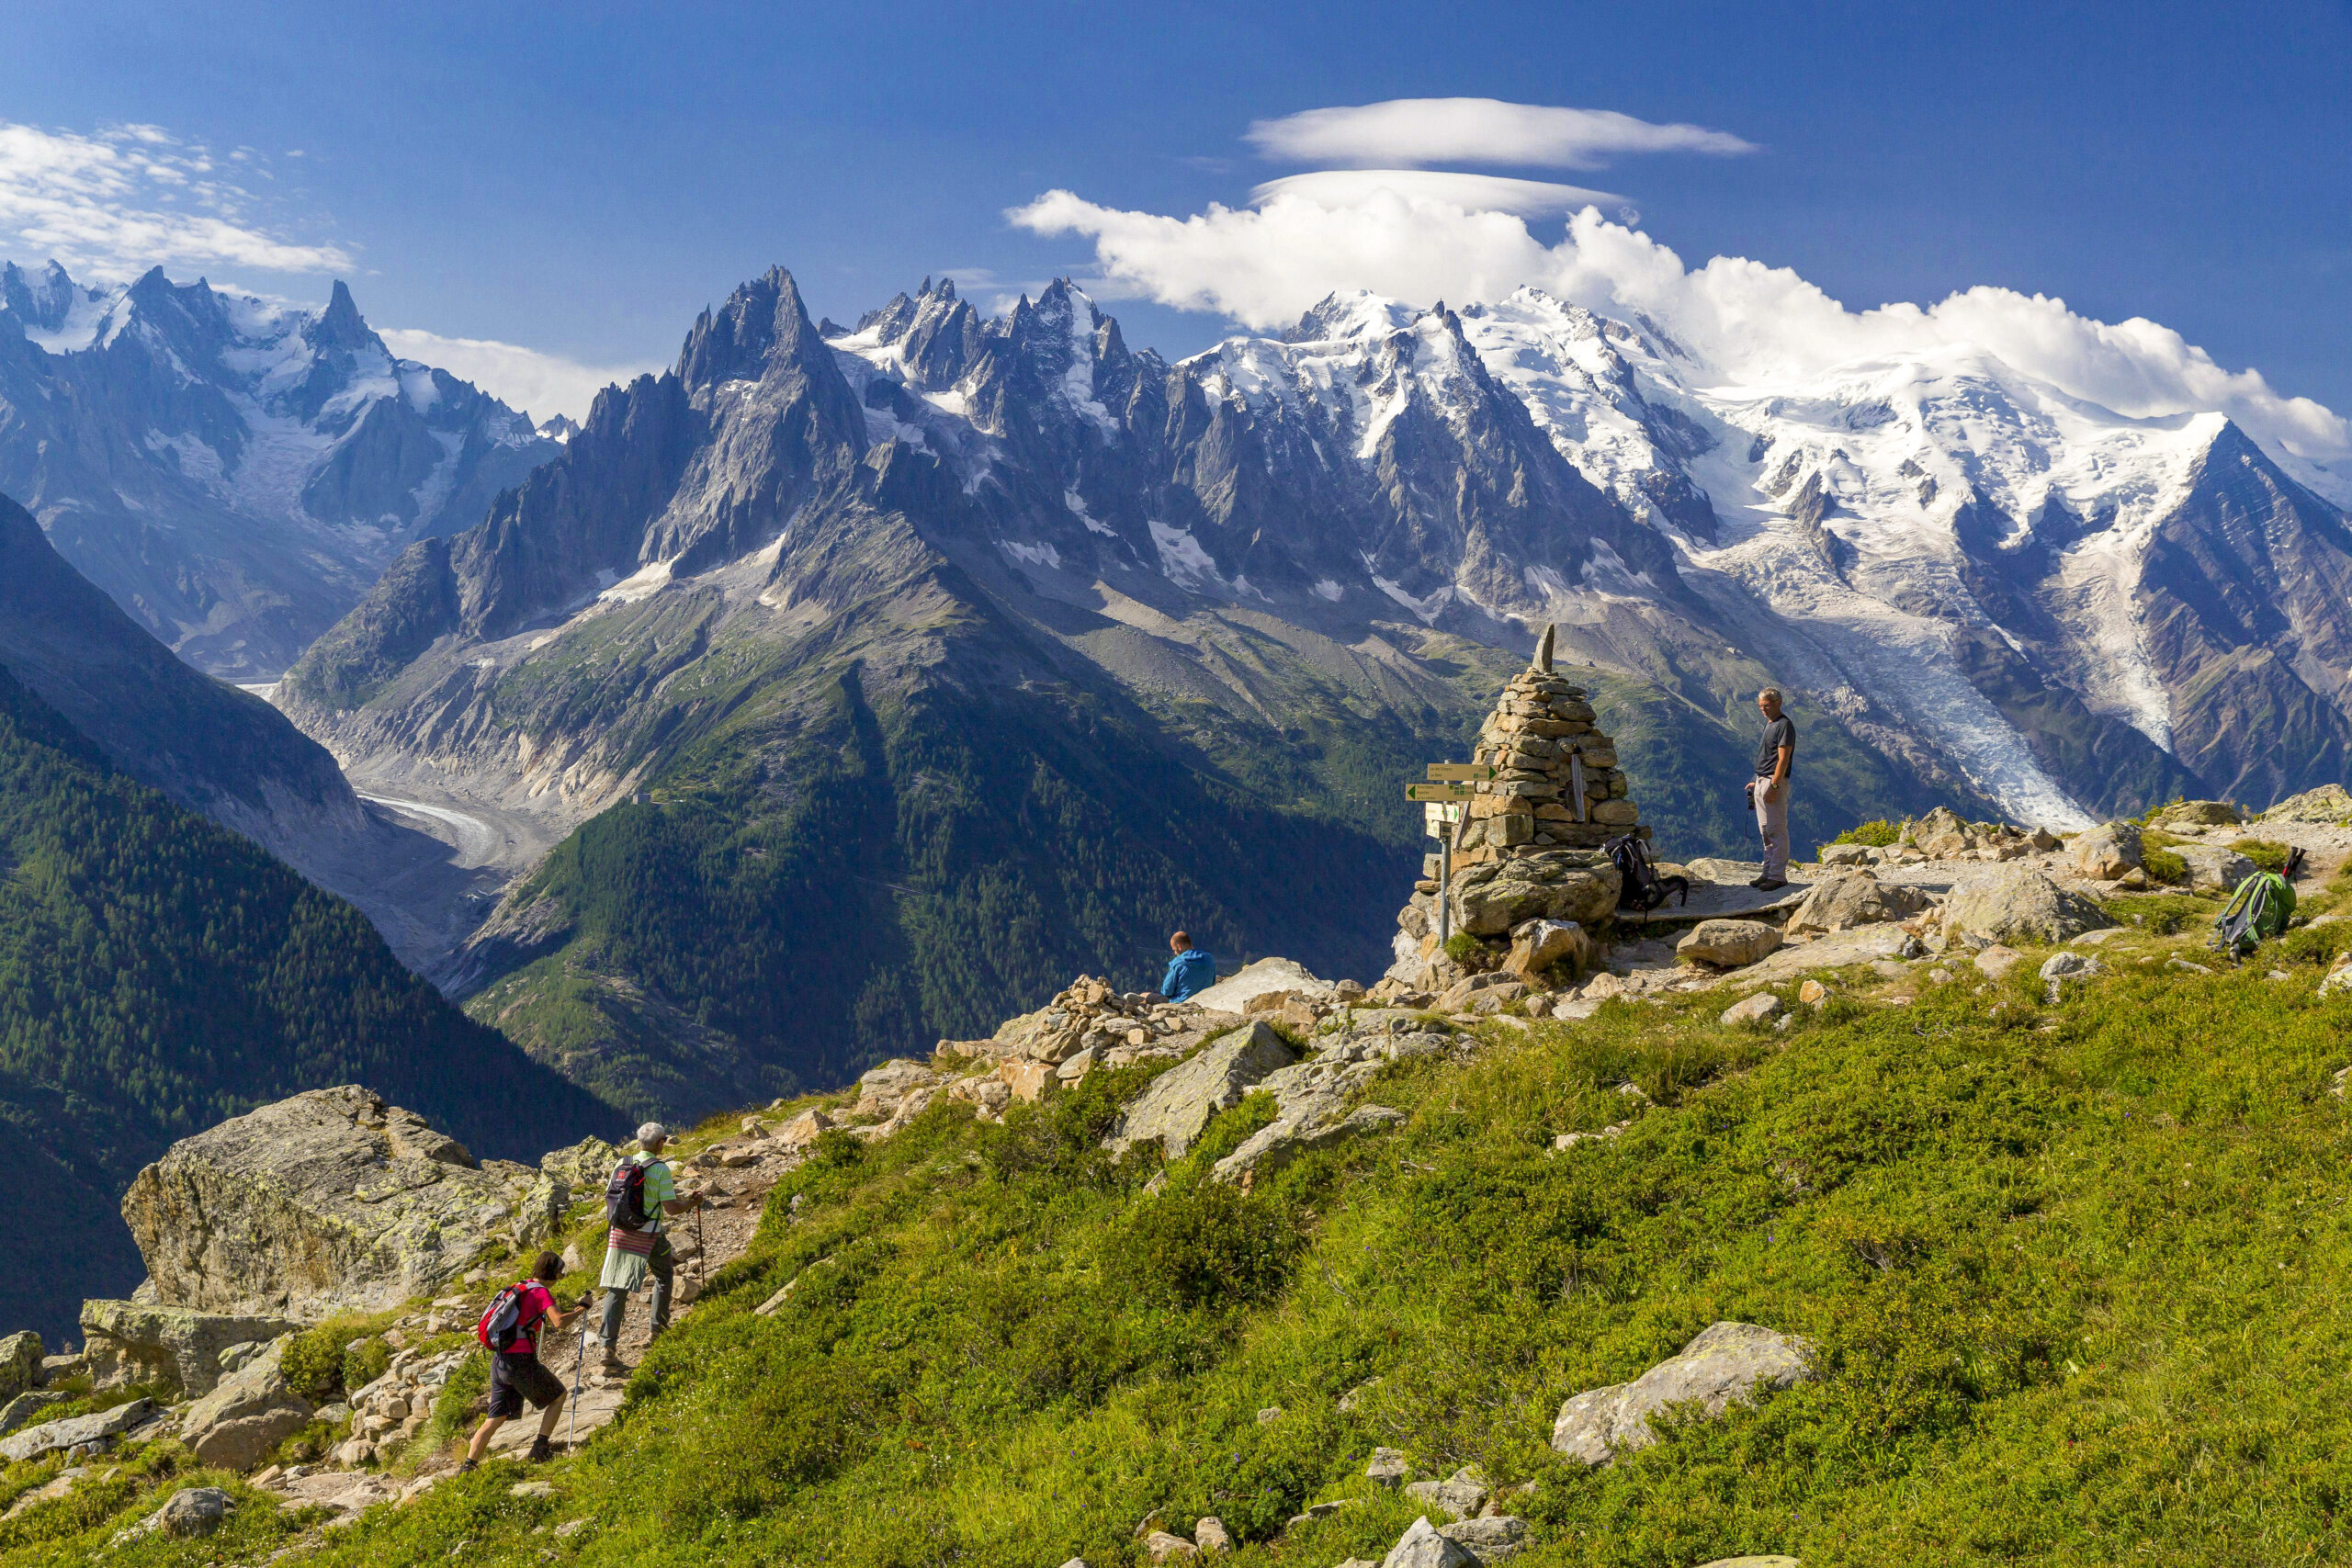 Haute Route Guided Hiking Tour | 8-Days Across the Alps